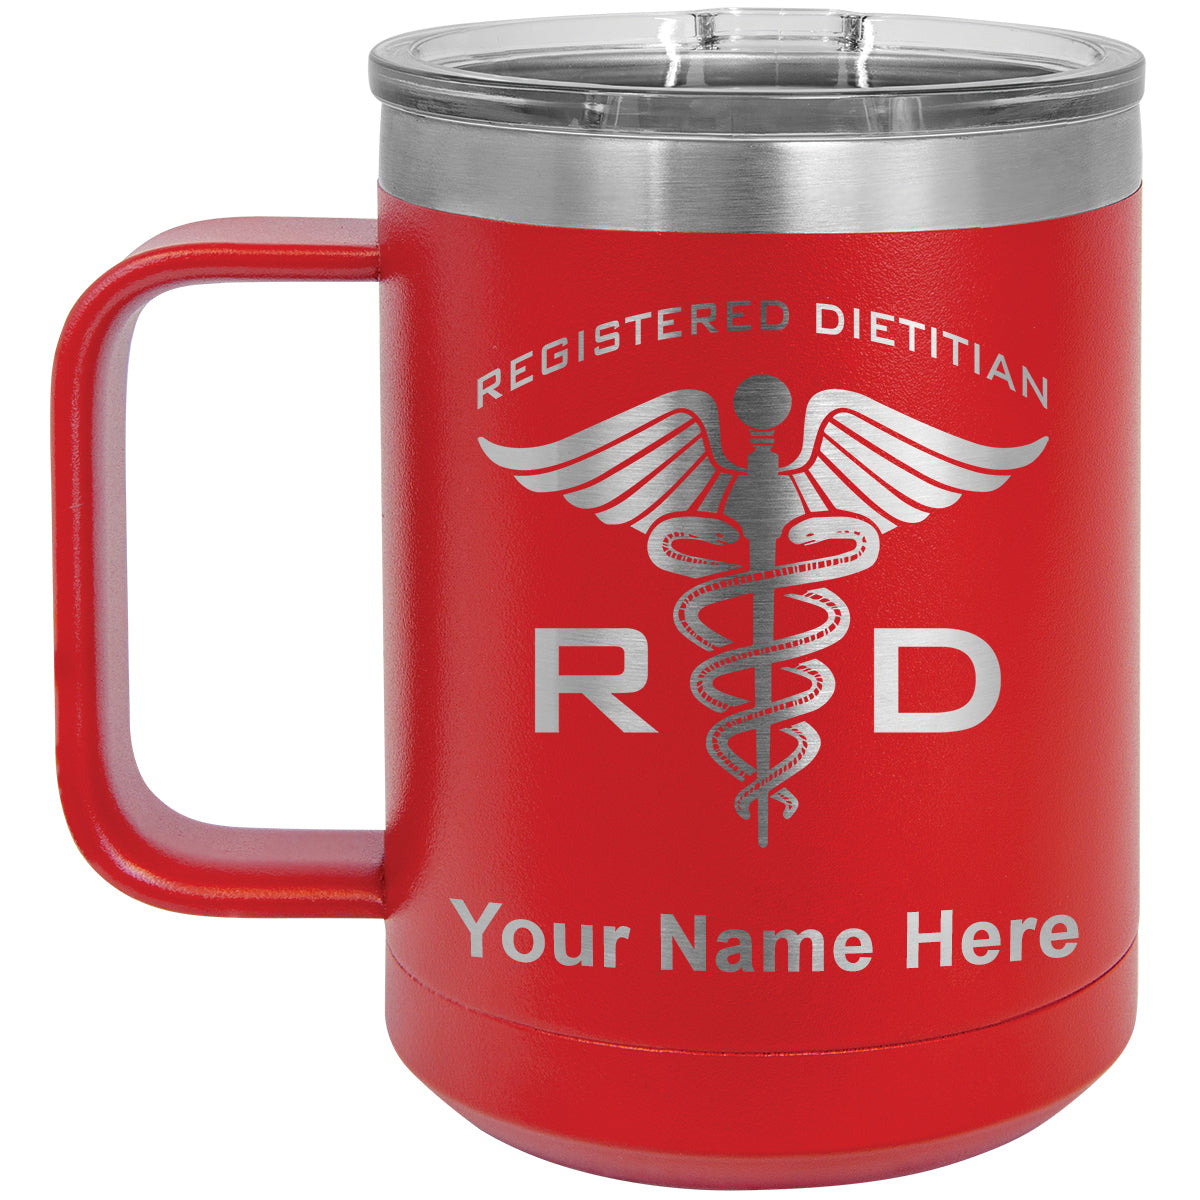 15oz Vacuum Insulated Coffee Mug, RD Registered Dietitian, Personalized Engraving Included